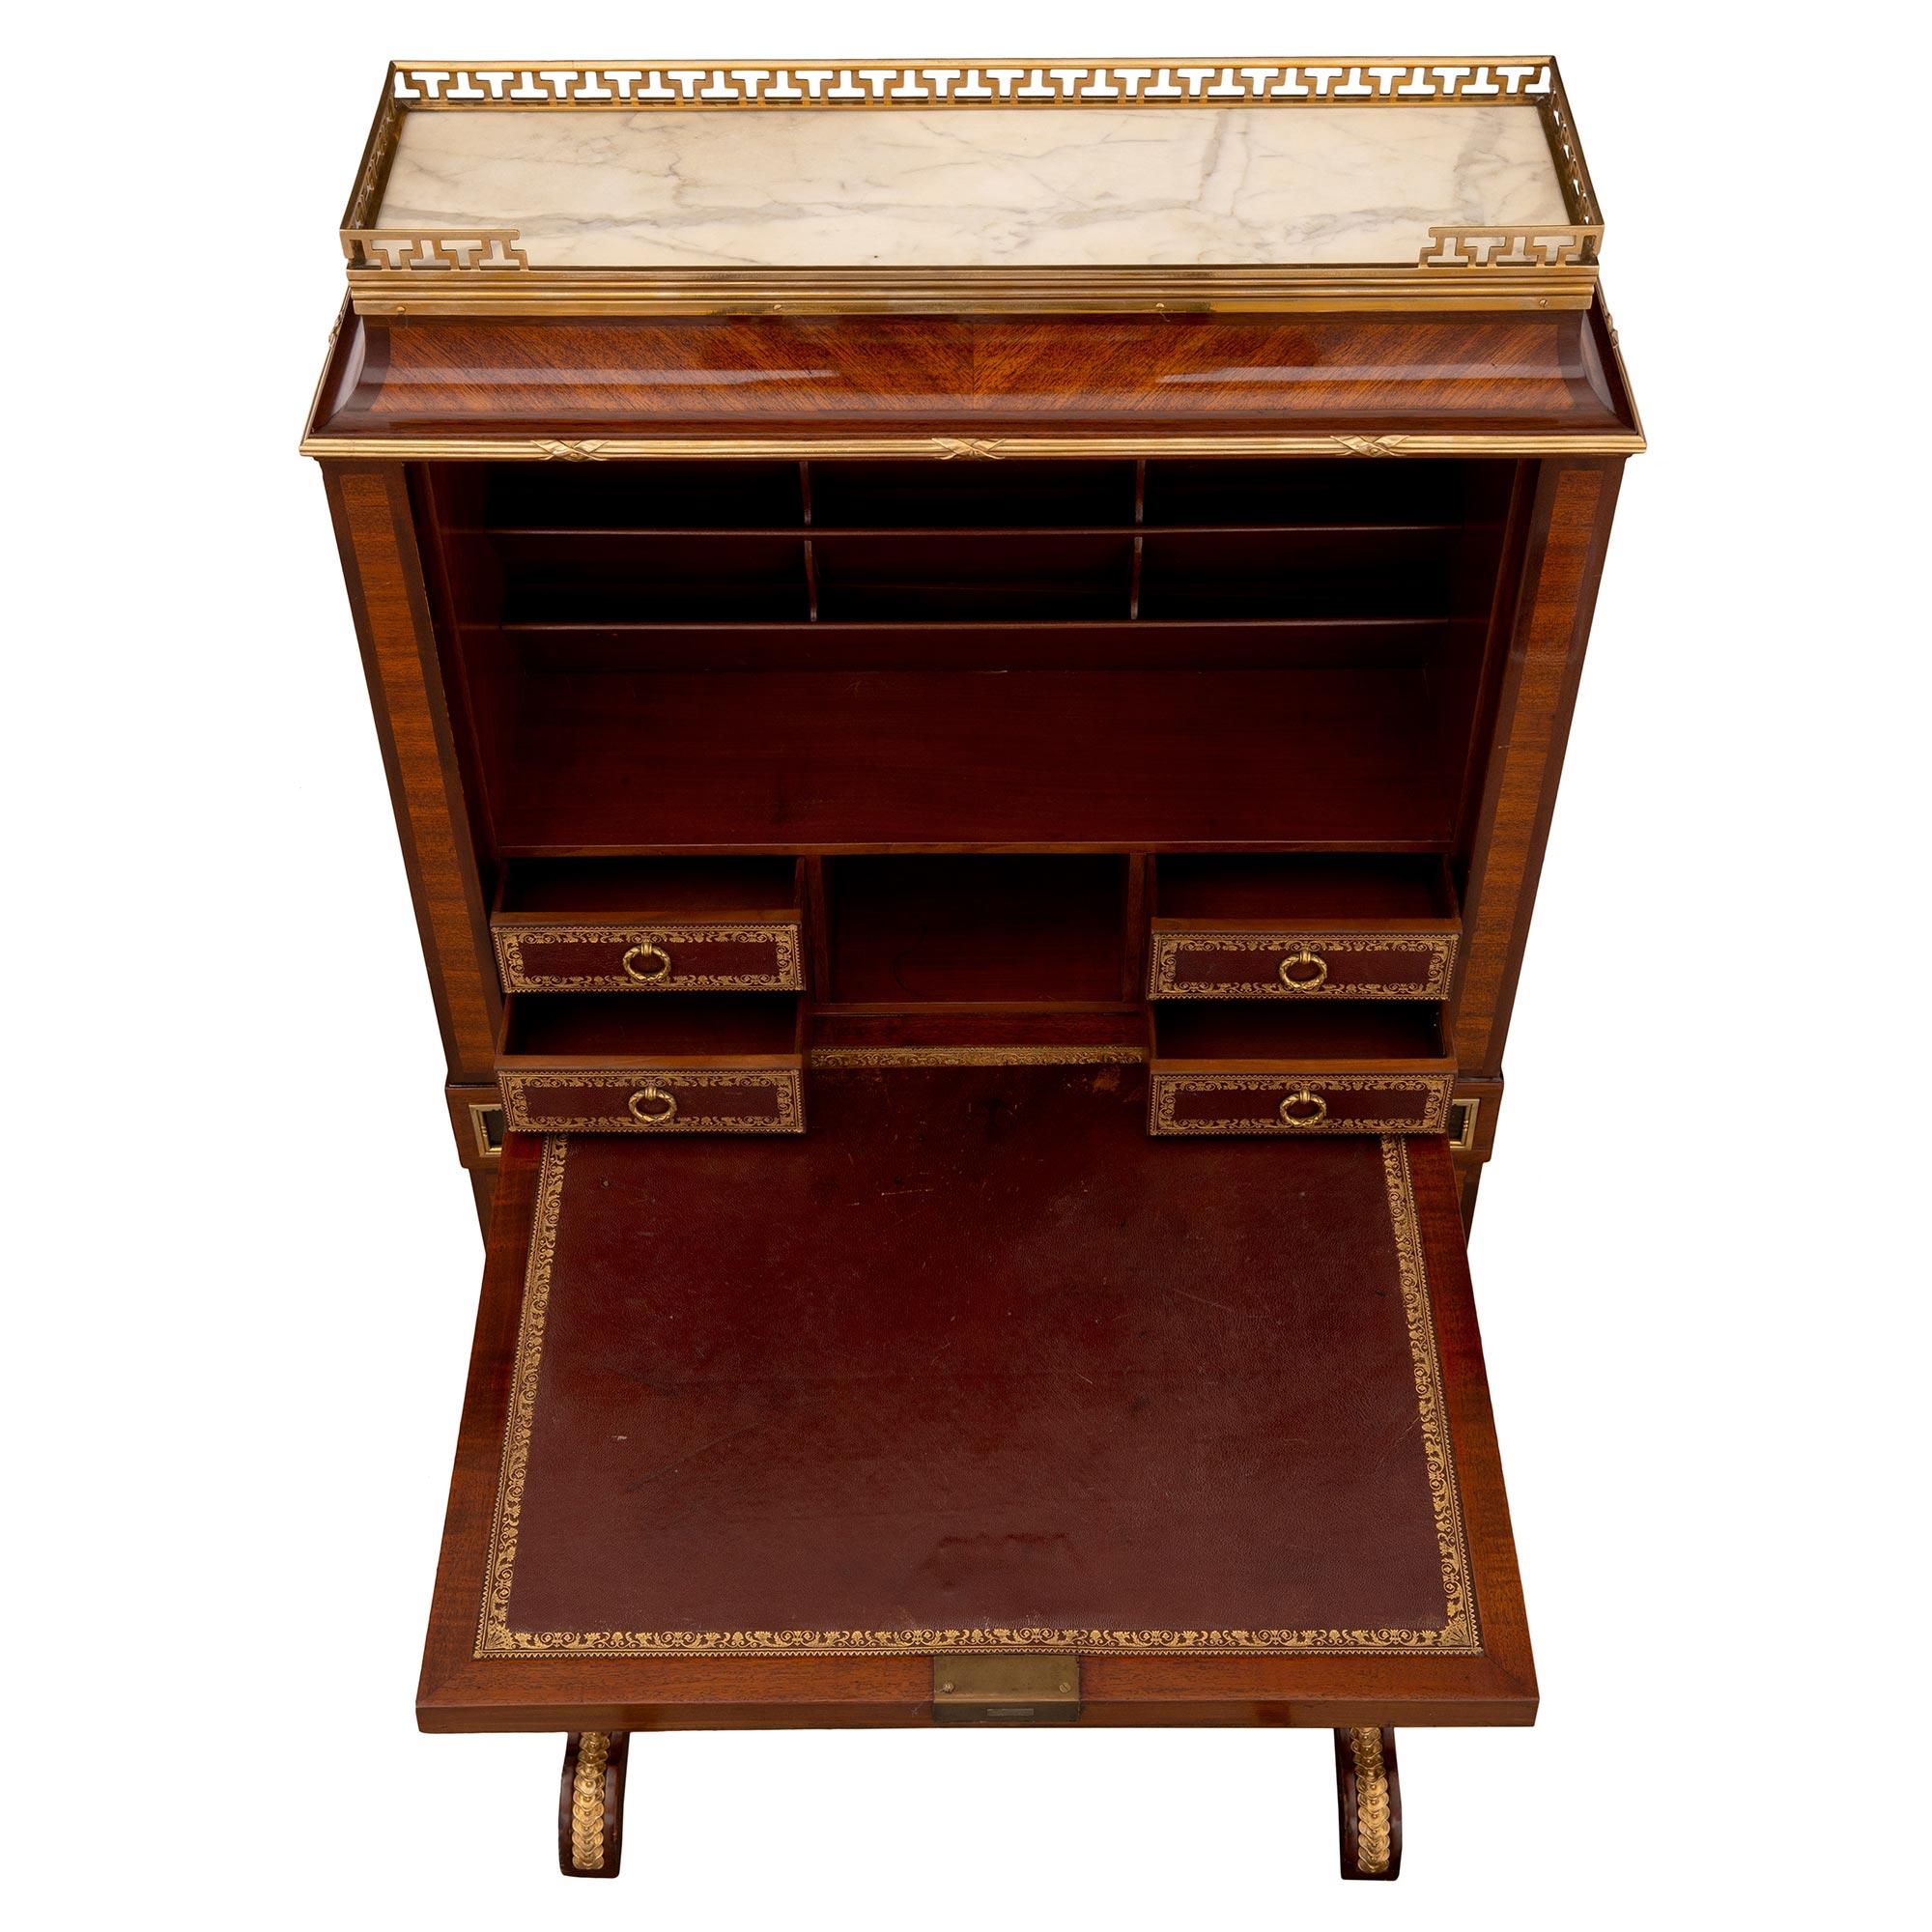 A very handsome and high quality French 19th century Louis XVI St. tulipwood, kingwood and ebony drop front desk. The desk is raised by four square columns joined by a bottom tier and decorated with a pierced ormolu gallery. Above is an exquisite